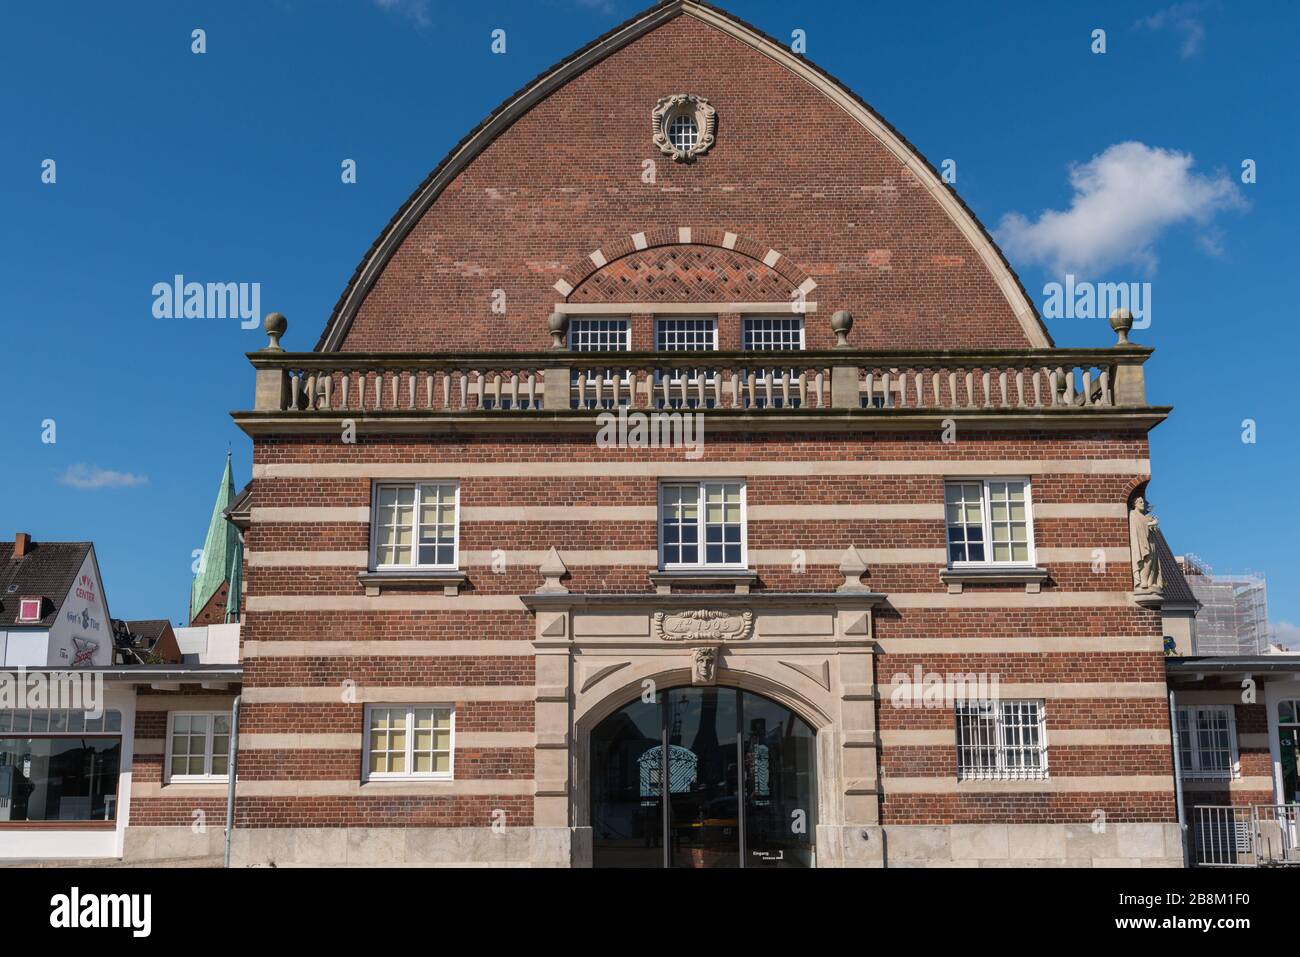 Fischauktionshalle or former fish market, today Schiffahrtsmuseum or Museum for Shipping Kiel, Schleswig-Holstein, North Germany, Central Europe Stock Photo